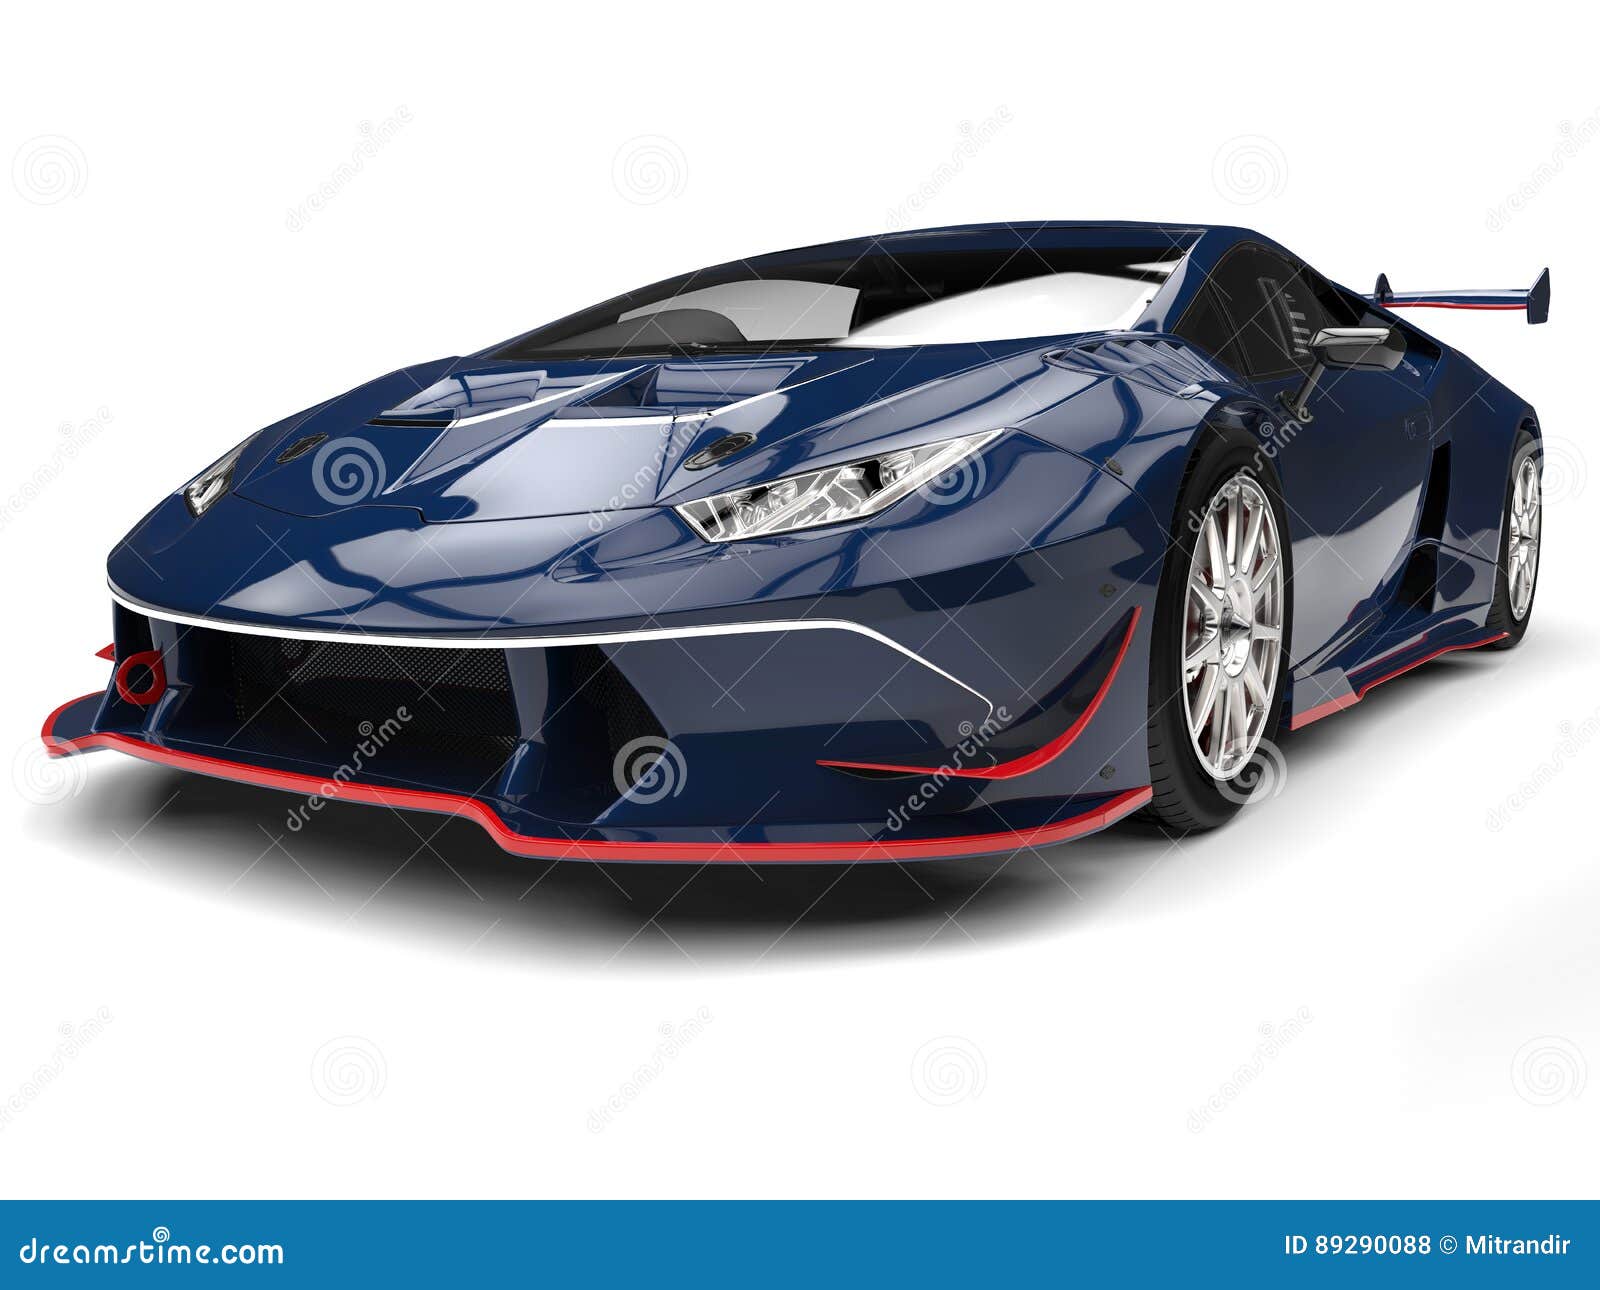 Cool Royal Blue Sports Car With Red Details - Front View ...